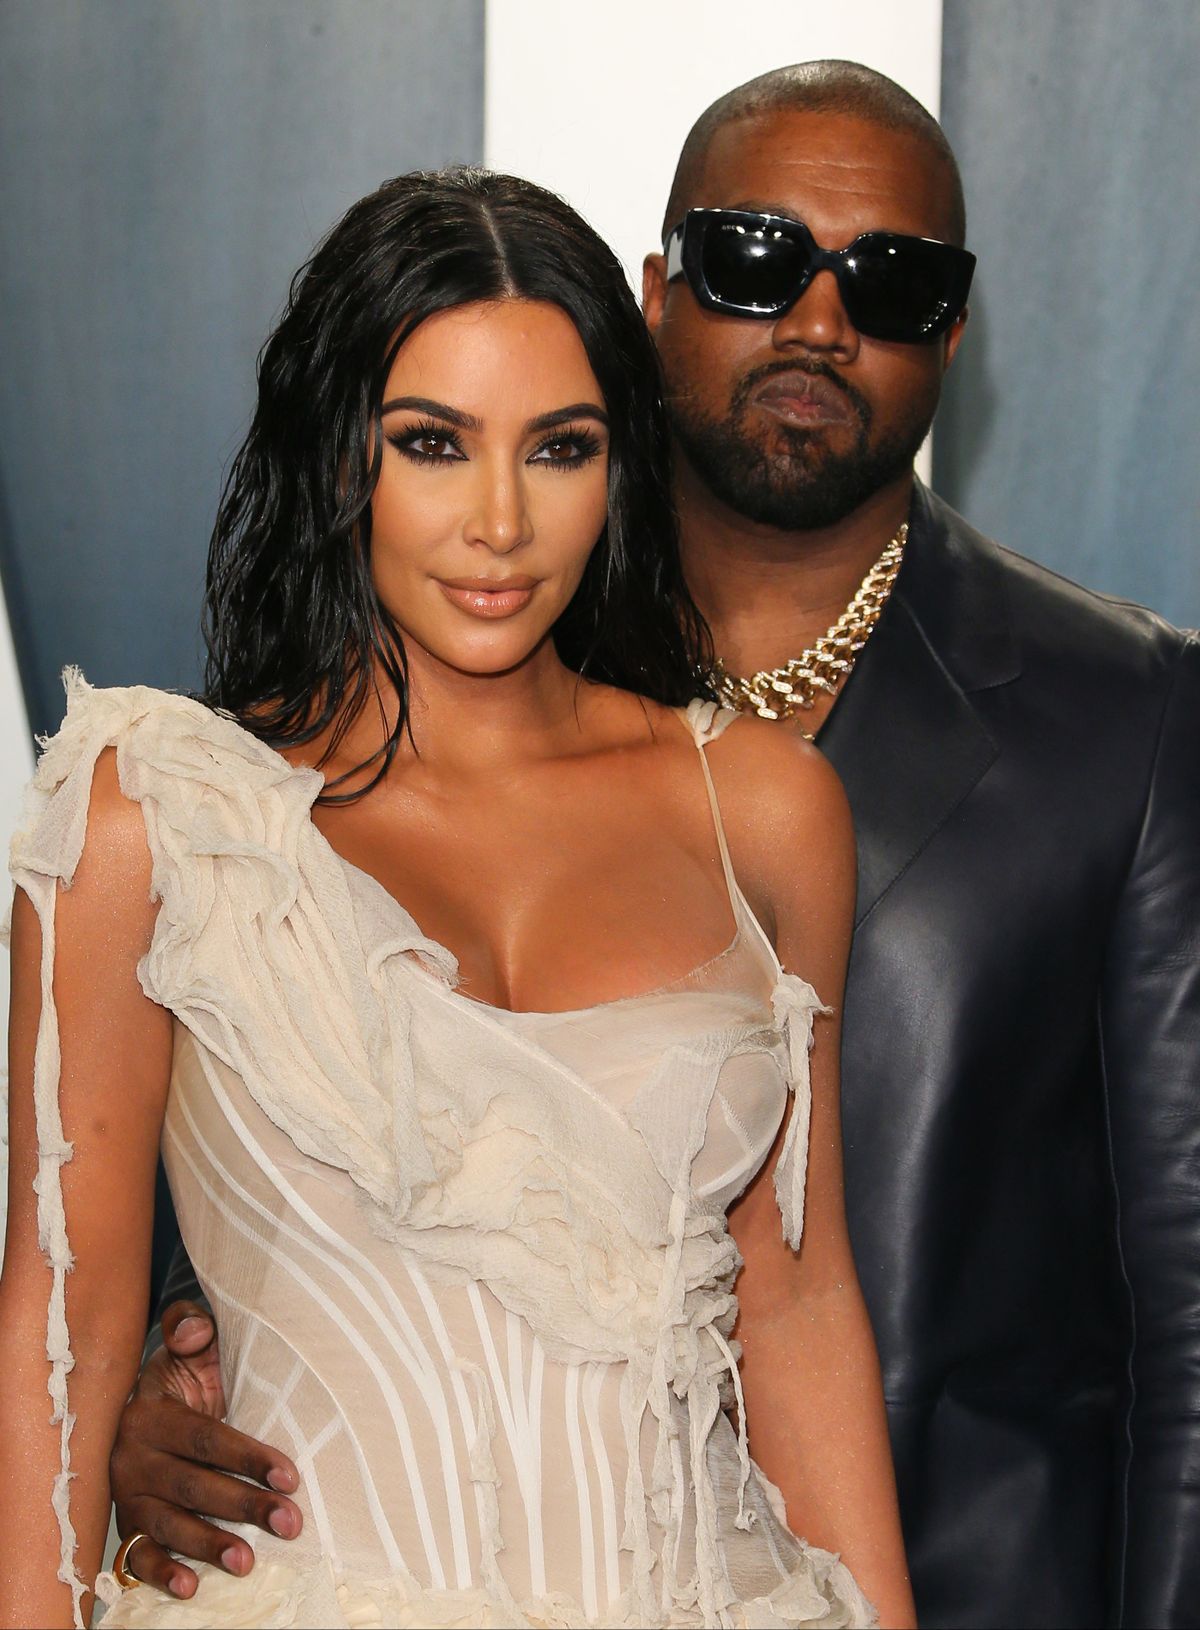 Kanye West and Kim Kardashian attend the 2020 Vanity Fair Oscar Party hosted by Radhika Jones at Wallis Annenberg Center for the Performing Arts on February 09, 2020 in Beverly Hills, California. (Photo by FPA / Full Picture Agency / Full Picture Agency via AFP)